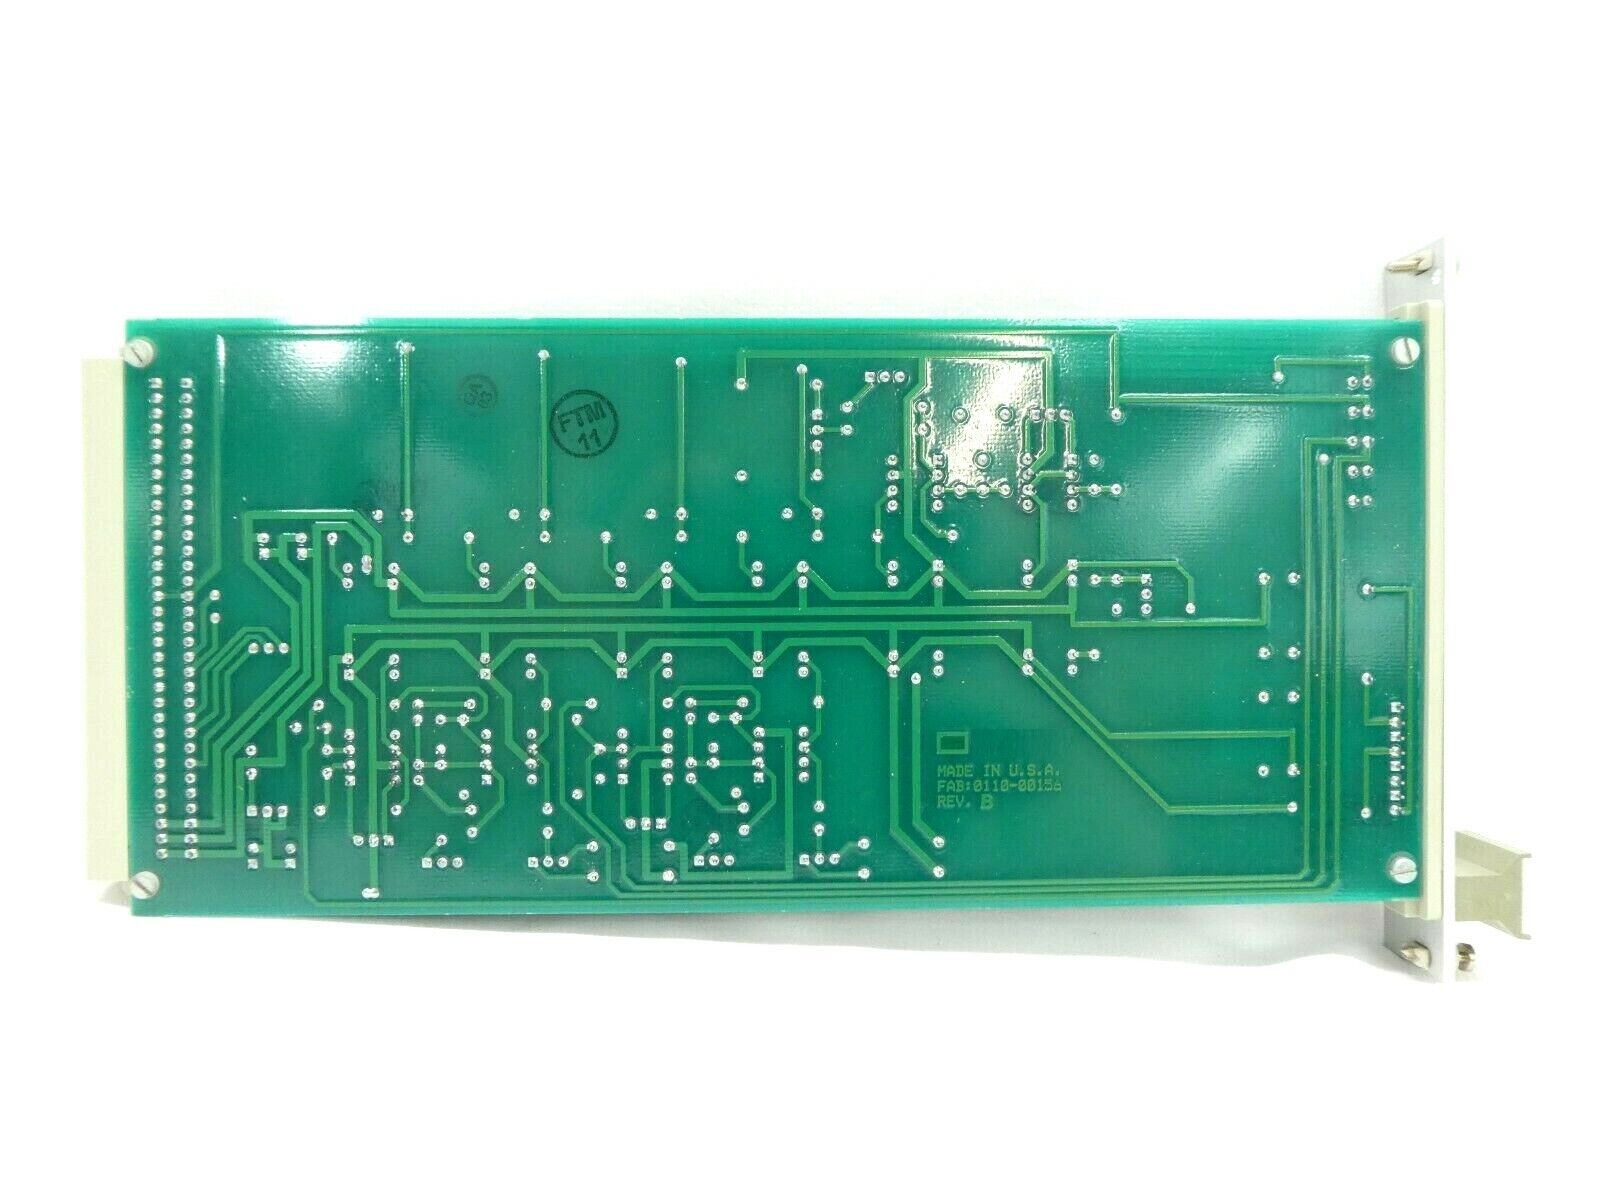 AMAT Applied Materials 0100-00156 Isolation Amplifier PCB Card Rev. B Working